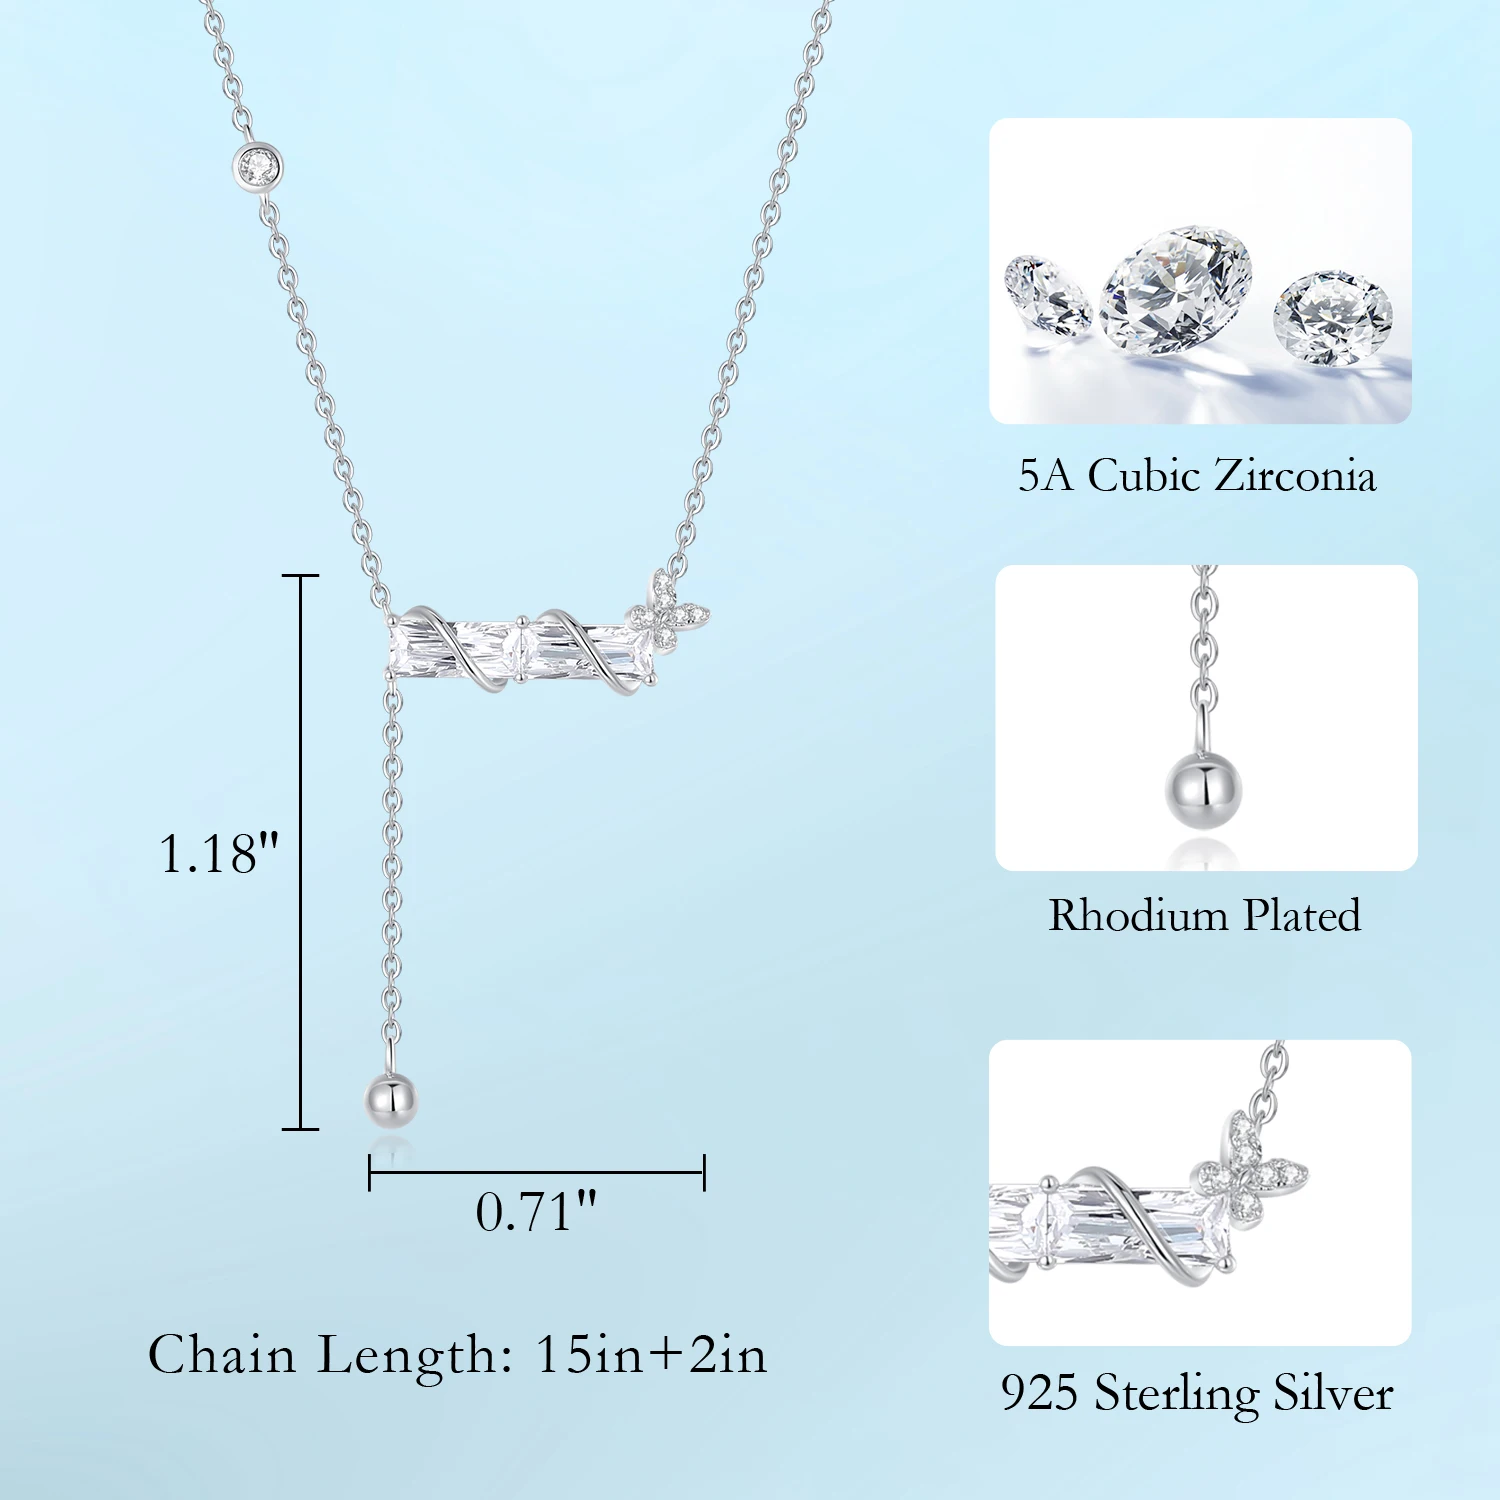 CDE CZYN007 Fine 925 Sterling Silver Jewelry Necklace Classic Zircon Pendant Rhodium Plated Women Pendant Necklace